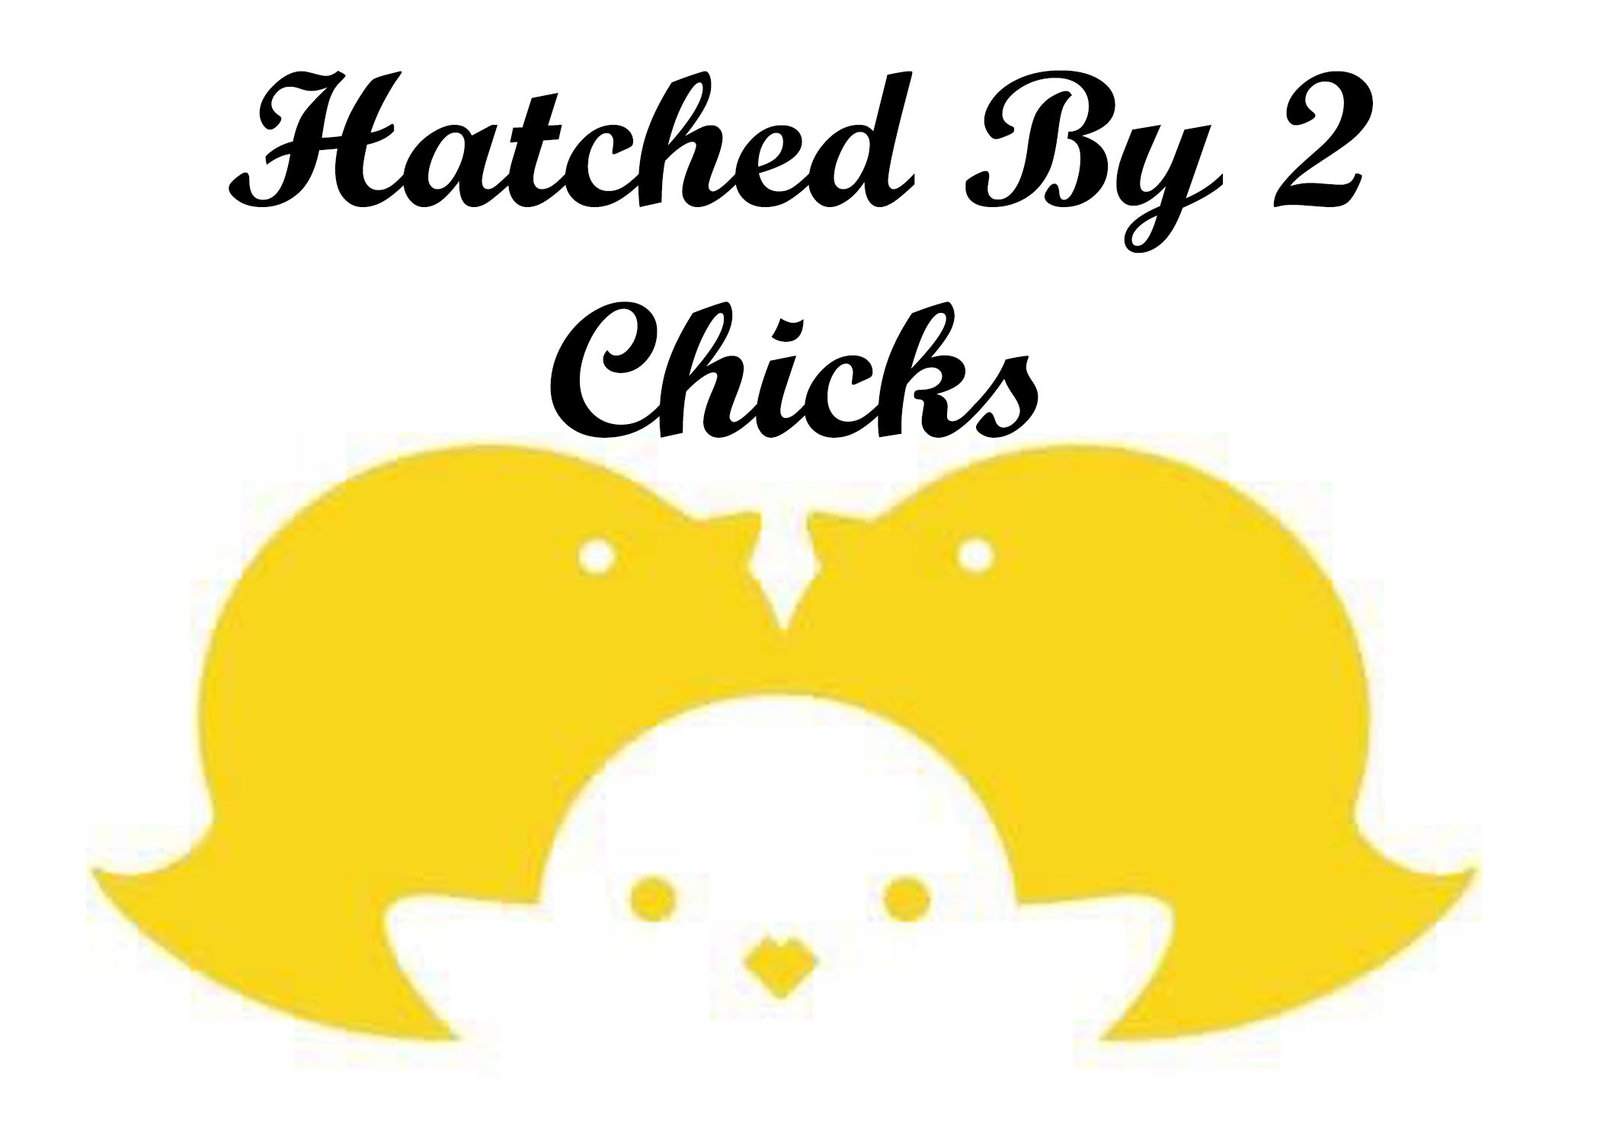 Hatched By 2 Chicks